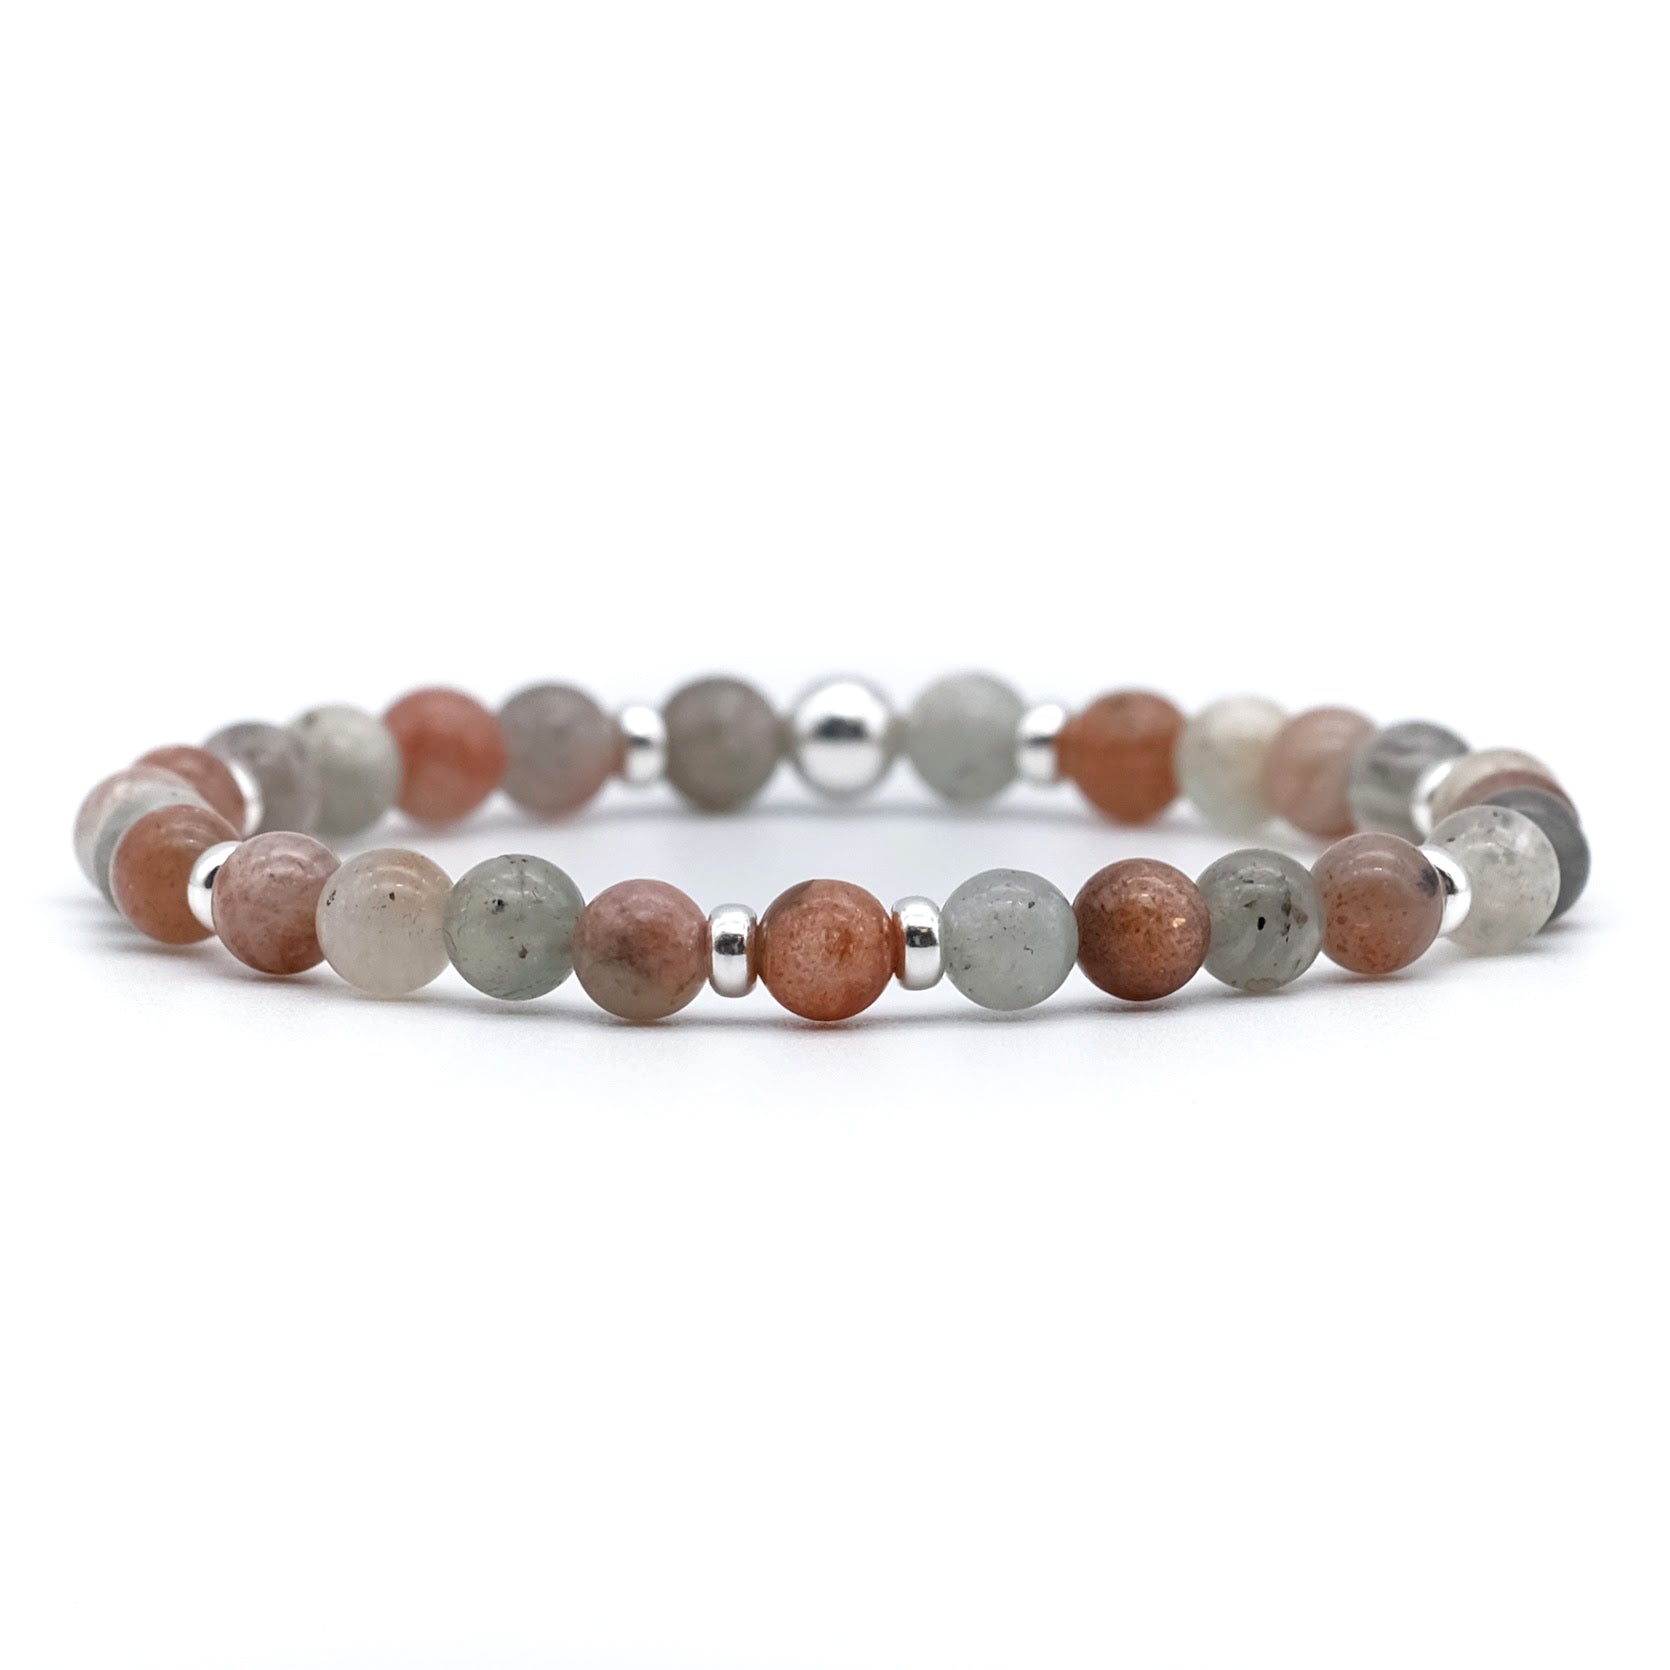 Arusha sunstone gemstone bracelet in 6mm with 925 silver accessories